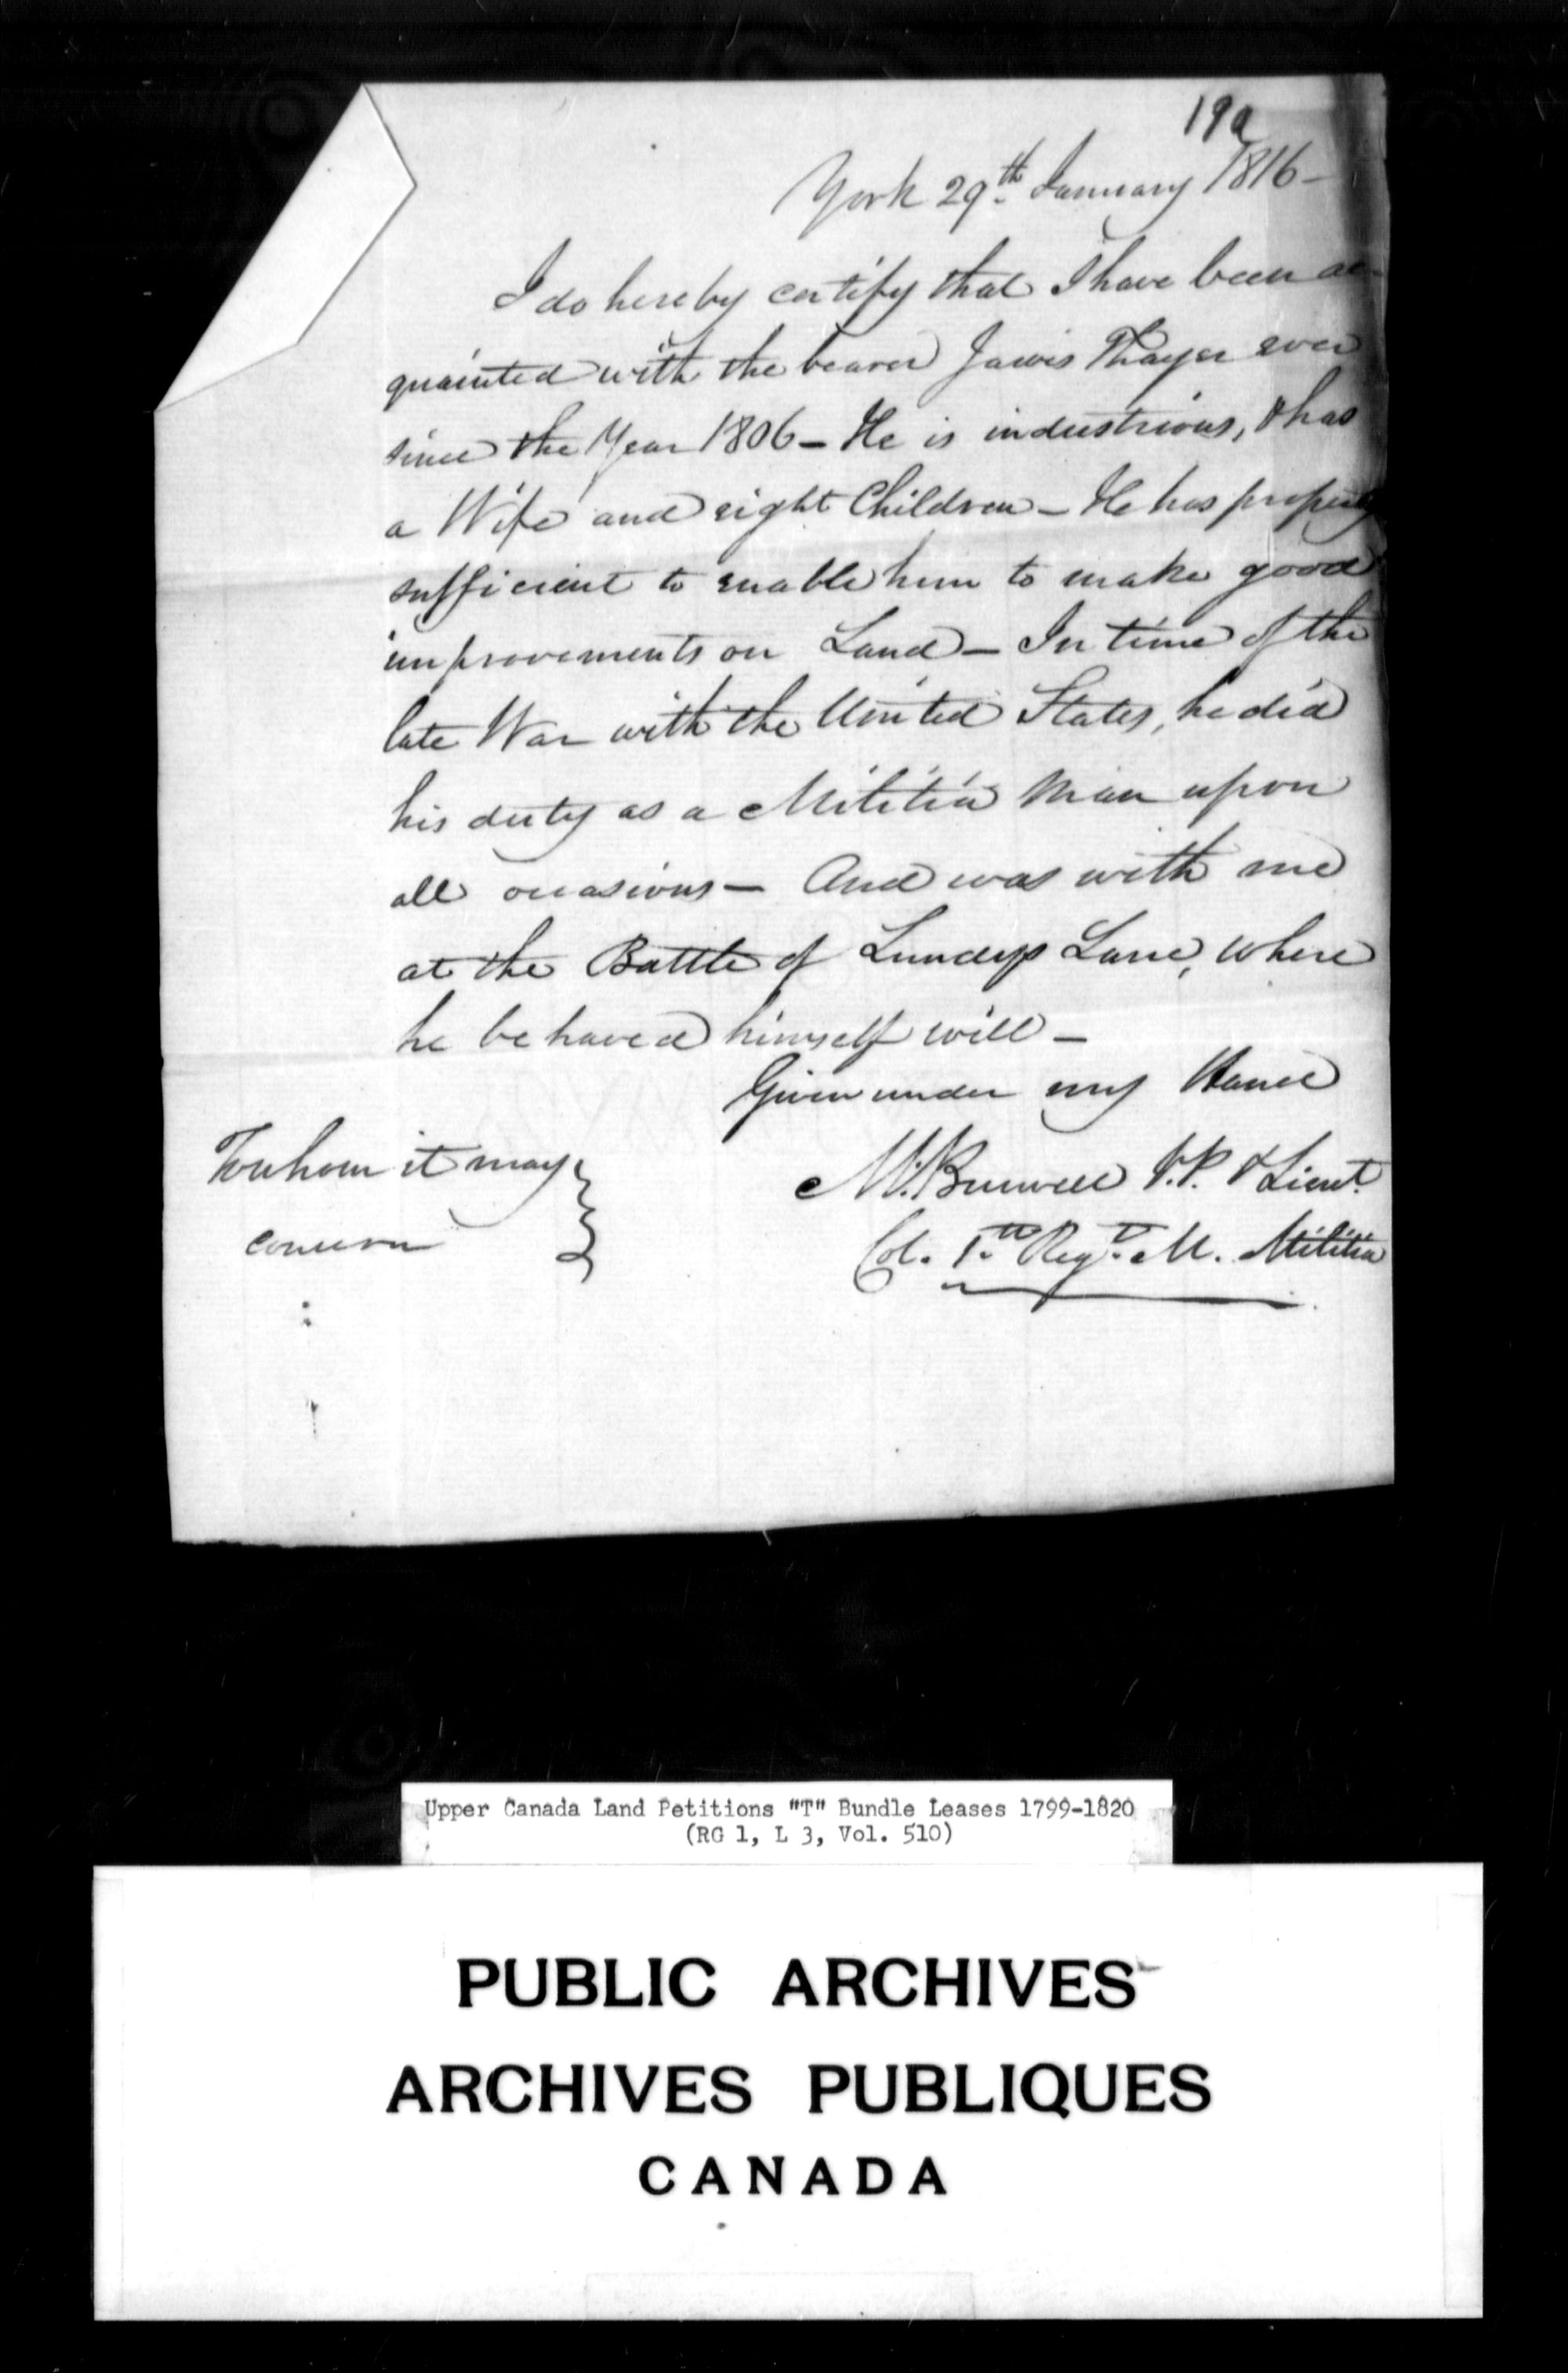 Title: Upper Canada Land Petitions (1763-1865) - Mikan Number: 205131 - Microform: c-2841